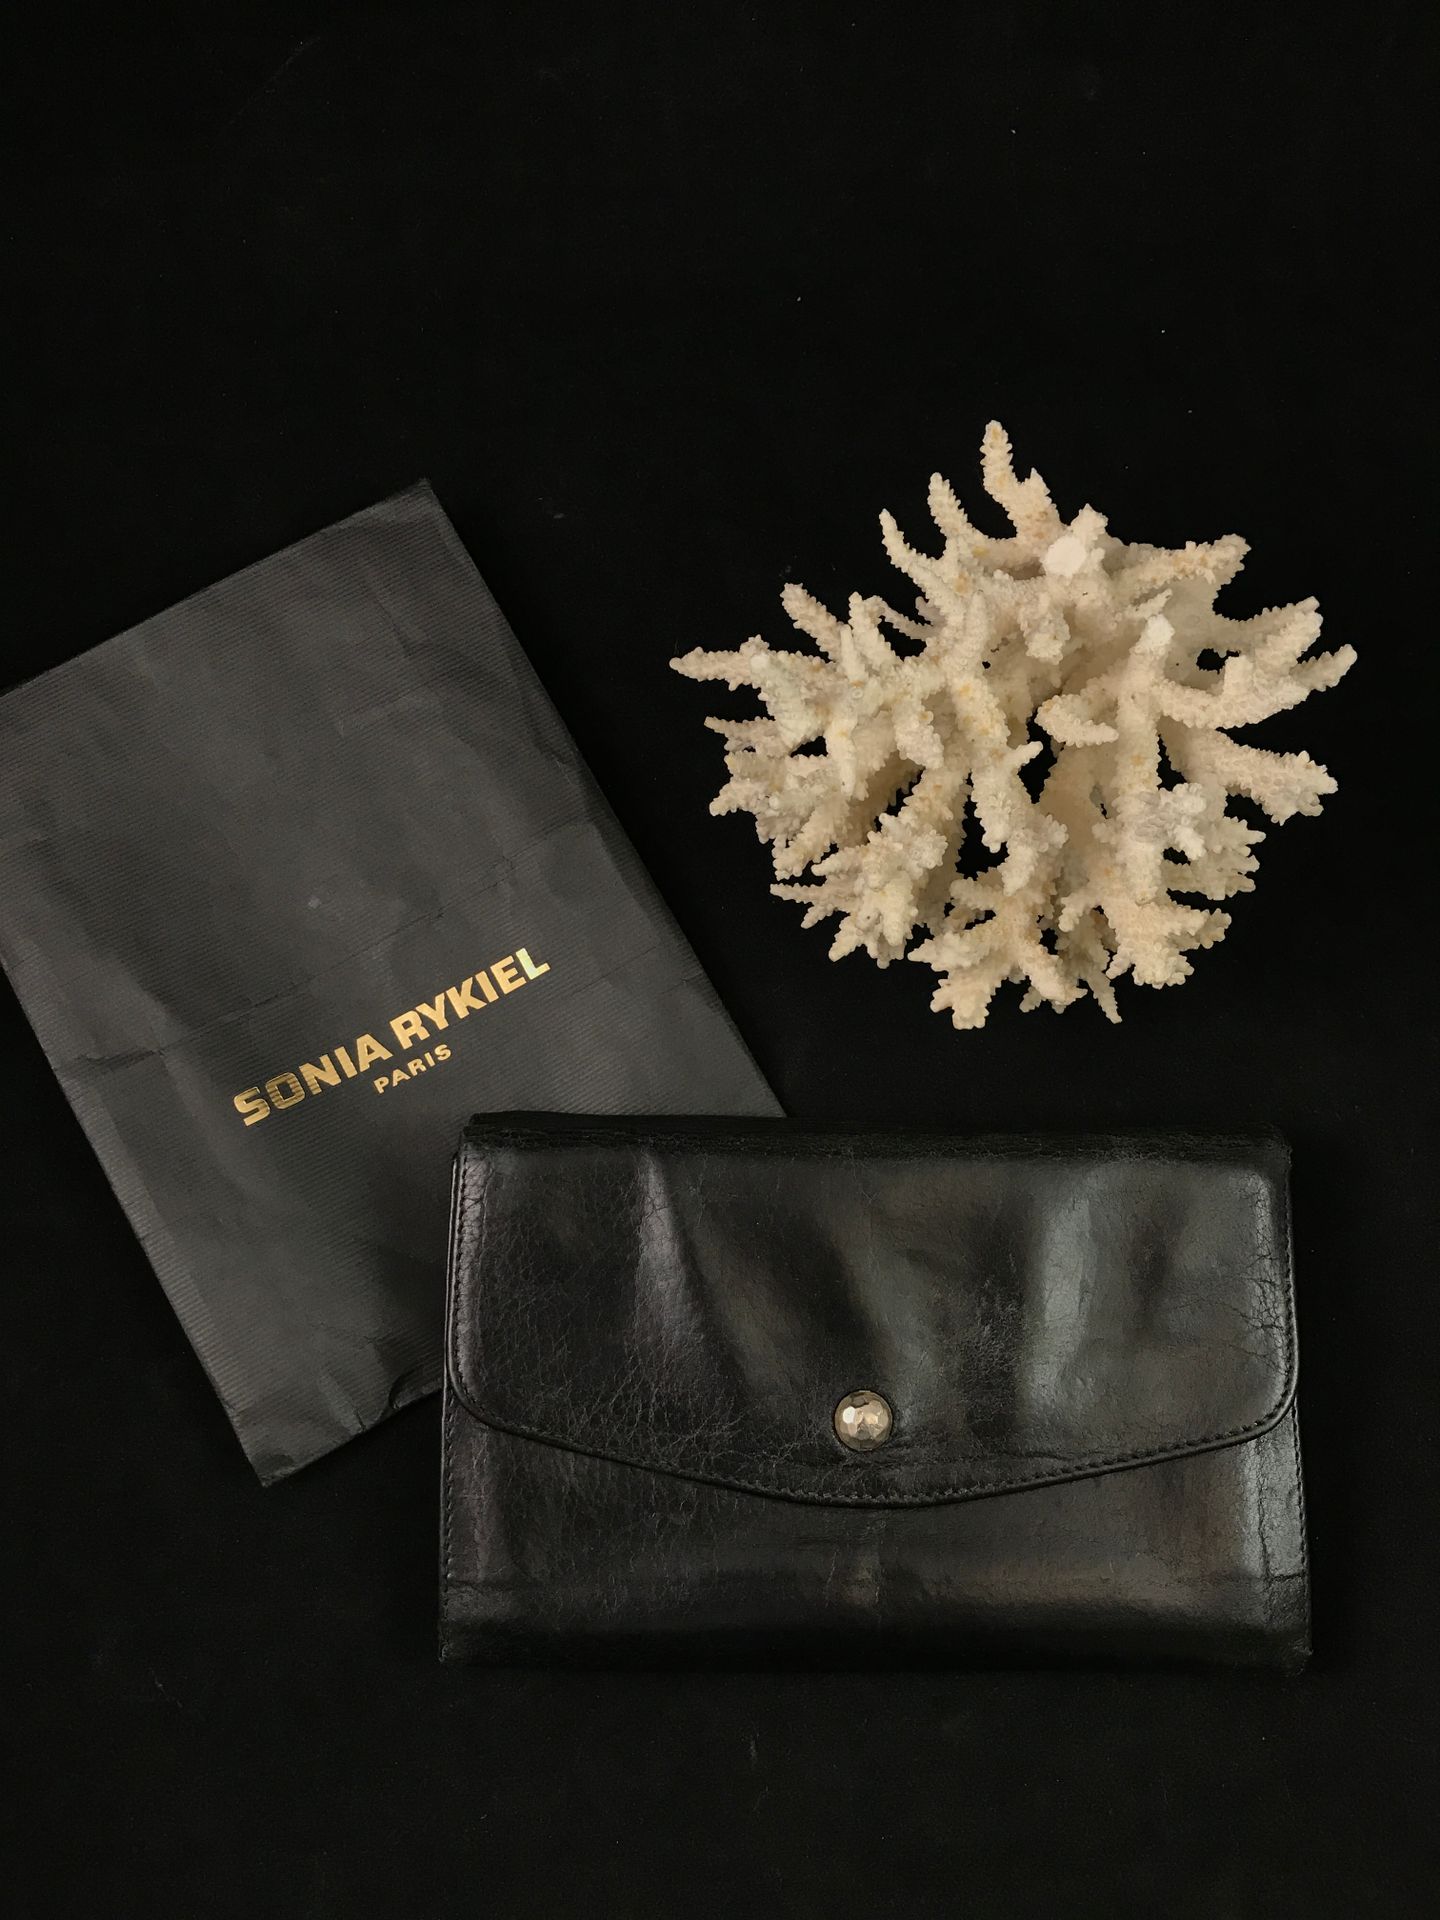 Null Sonia Rykiel Black leather wallet. Condition of use.